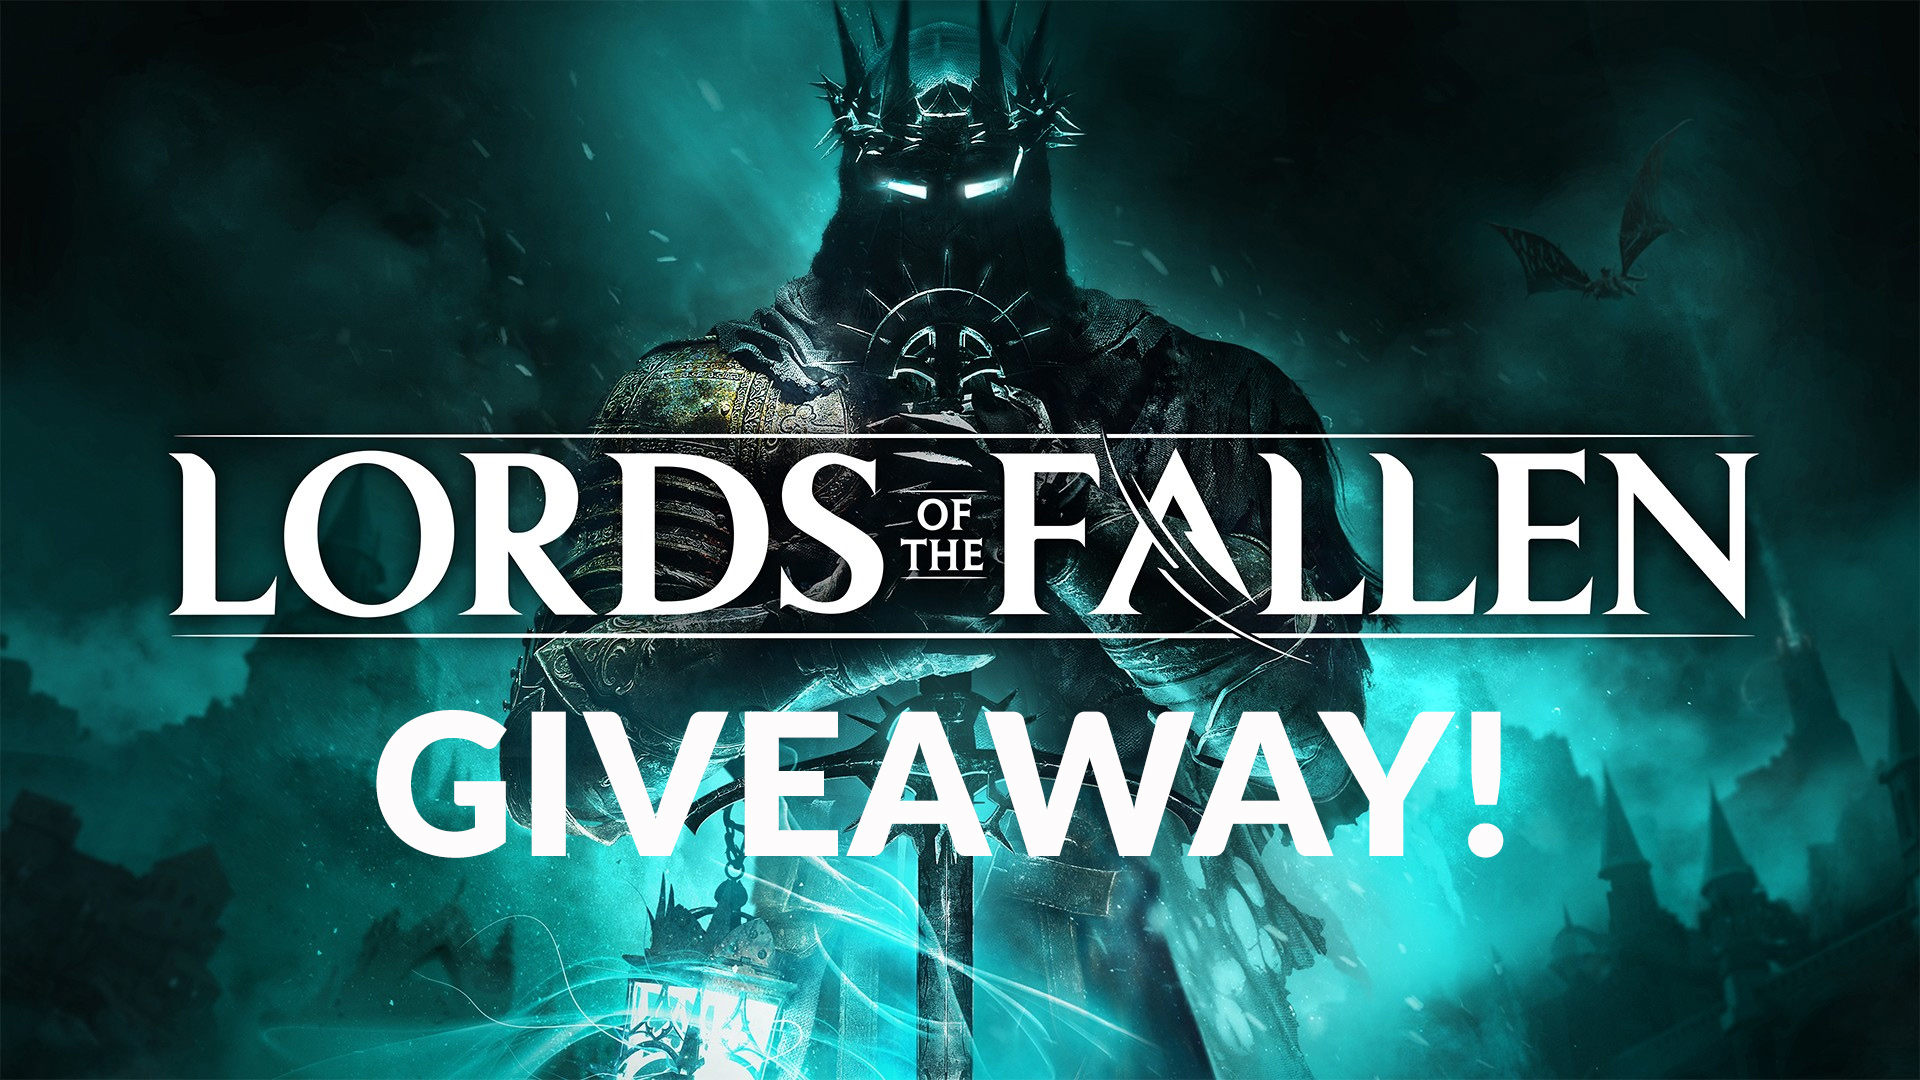 The Winners Of Our PS5 And Lords Of The Fallen Giveaway